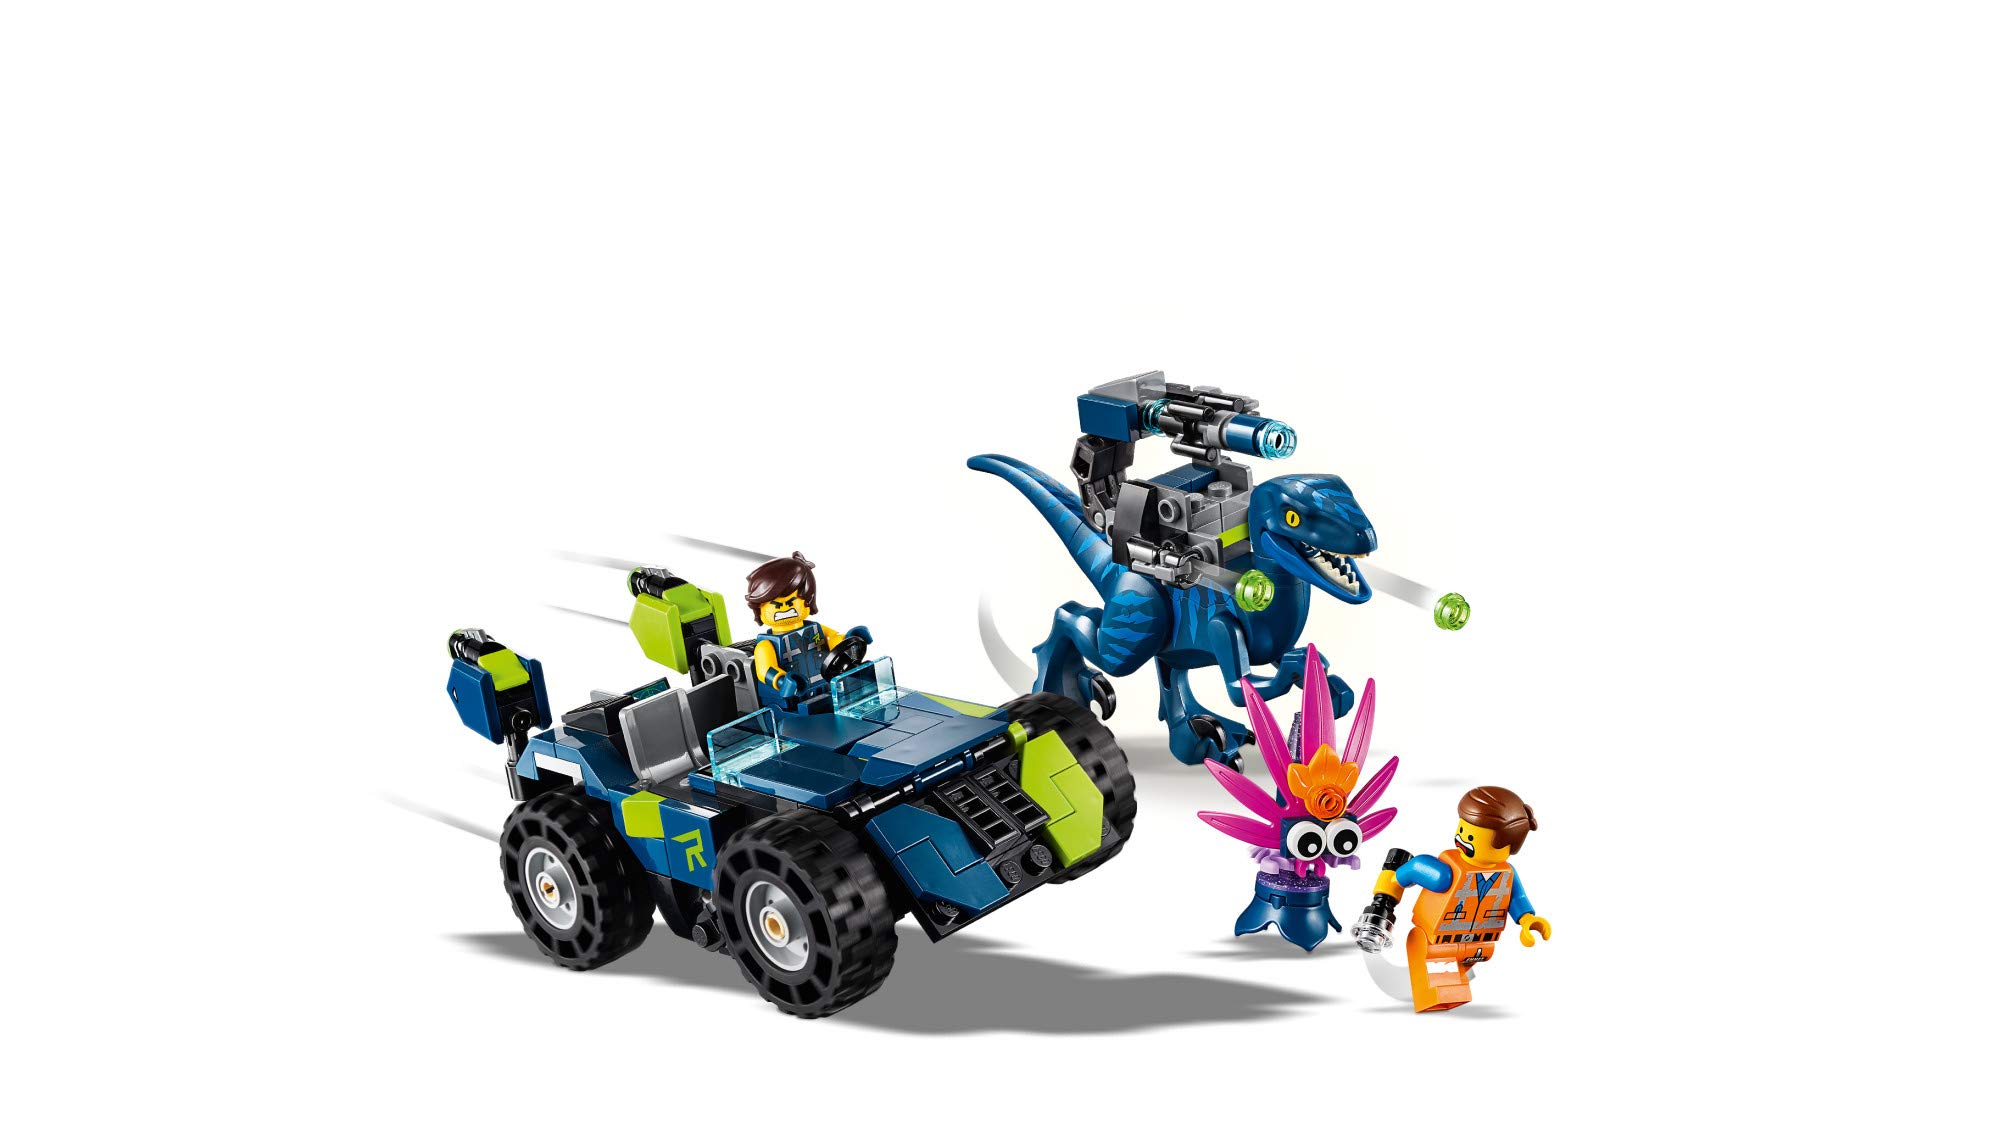 LEGO The Movie 2 Rex’s Rex-treme Offroader! 70826 Dinosaur Car Toy Set for Boys and Girls, Action Building Kit (230 Pieces)